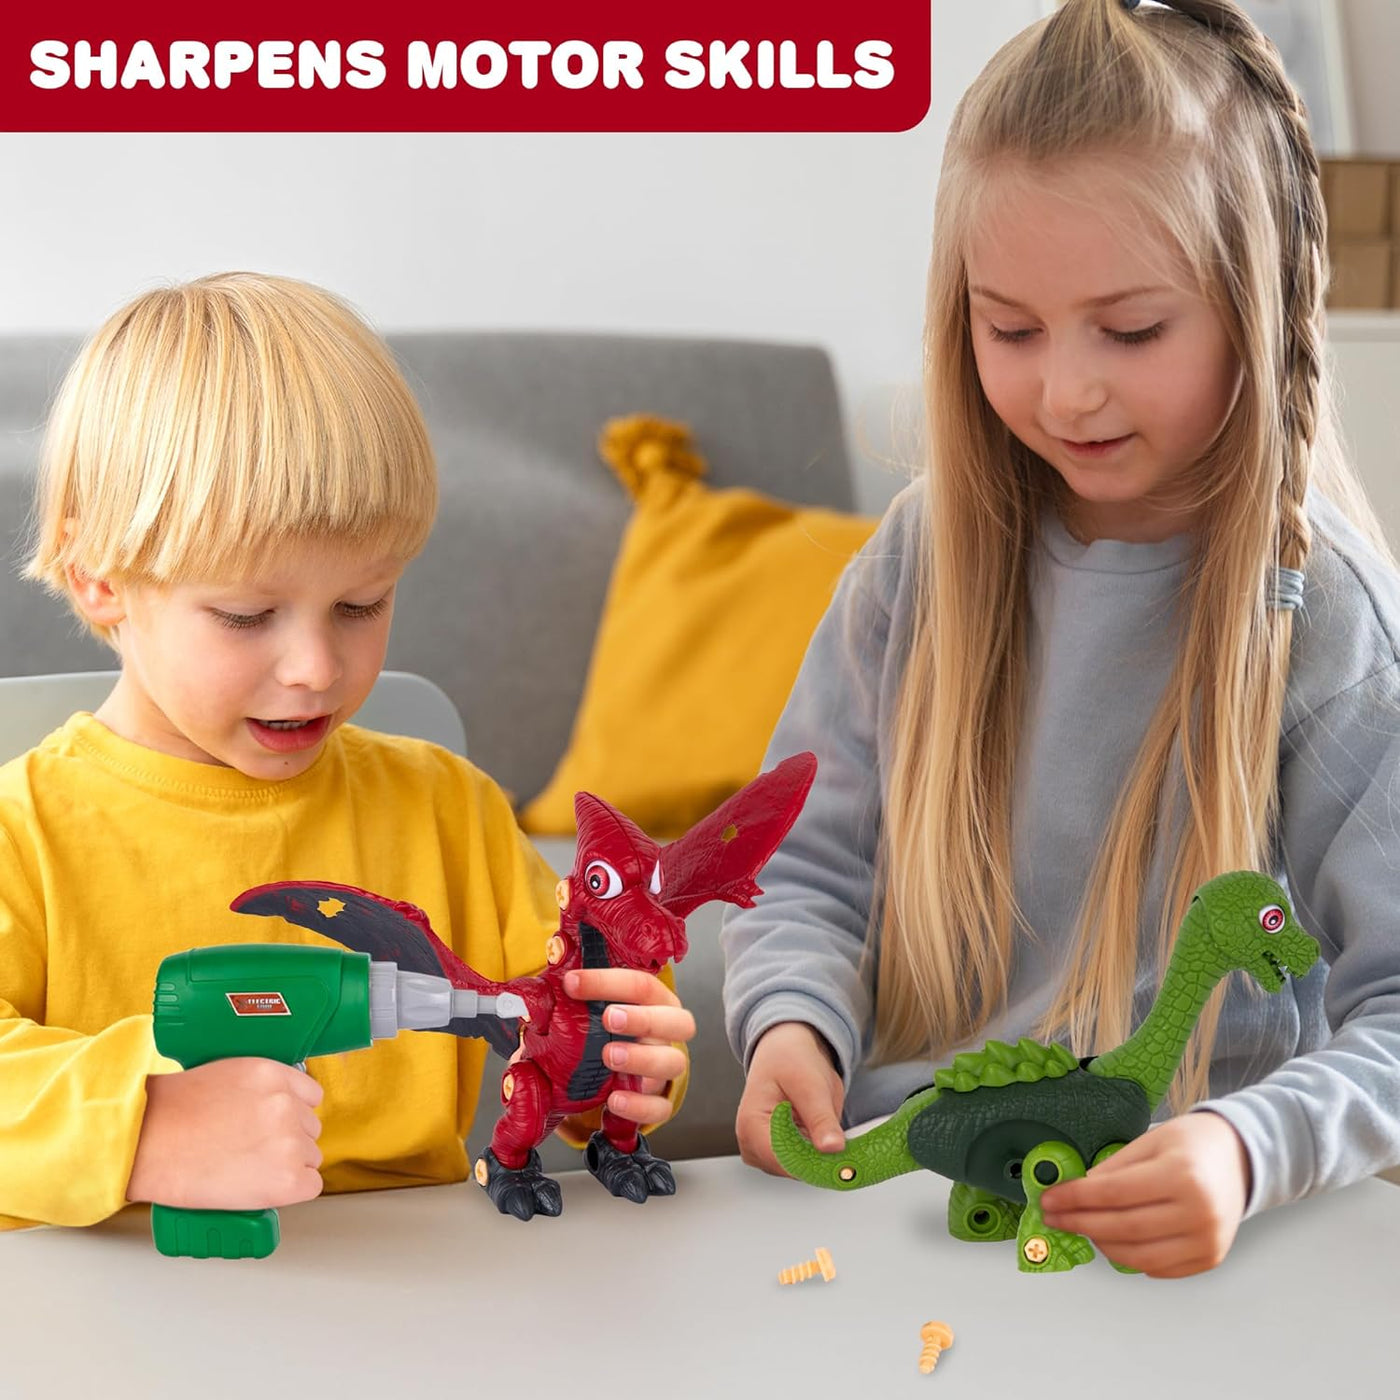 Take Apart Dinosaur Toys - Makes 3 Toy Dinosaurs - Take Apart Toy Set Includes Electric Drill, Assorted Tools, and Parts for T-Rex, Pterodactyl, and Brachiosaurus - Dino Gifts for Boy 4 5